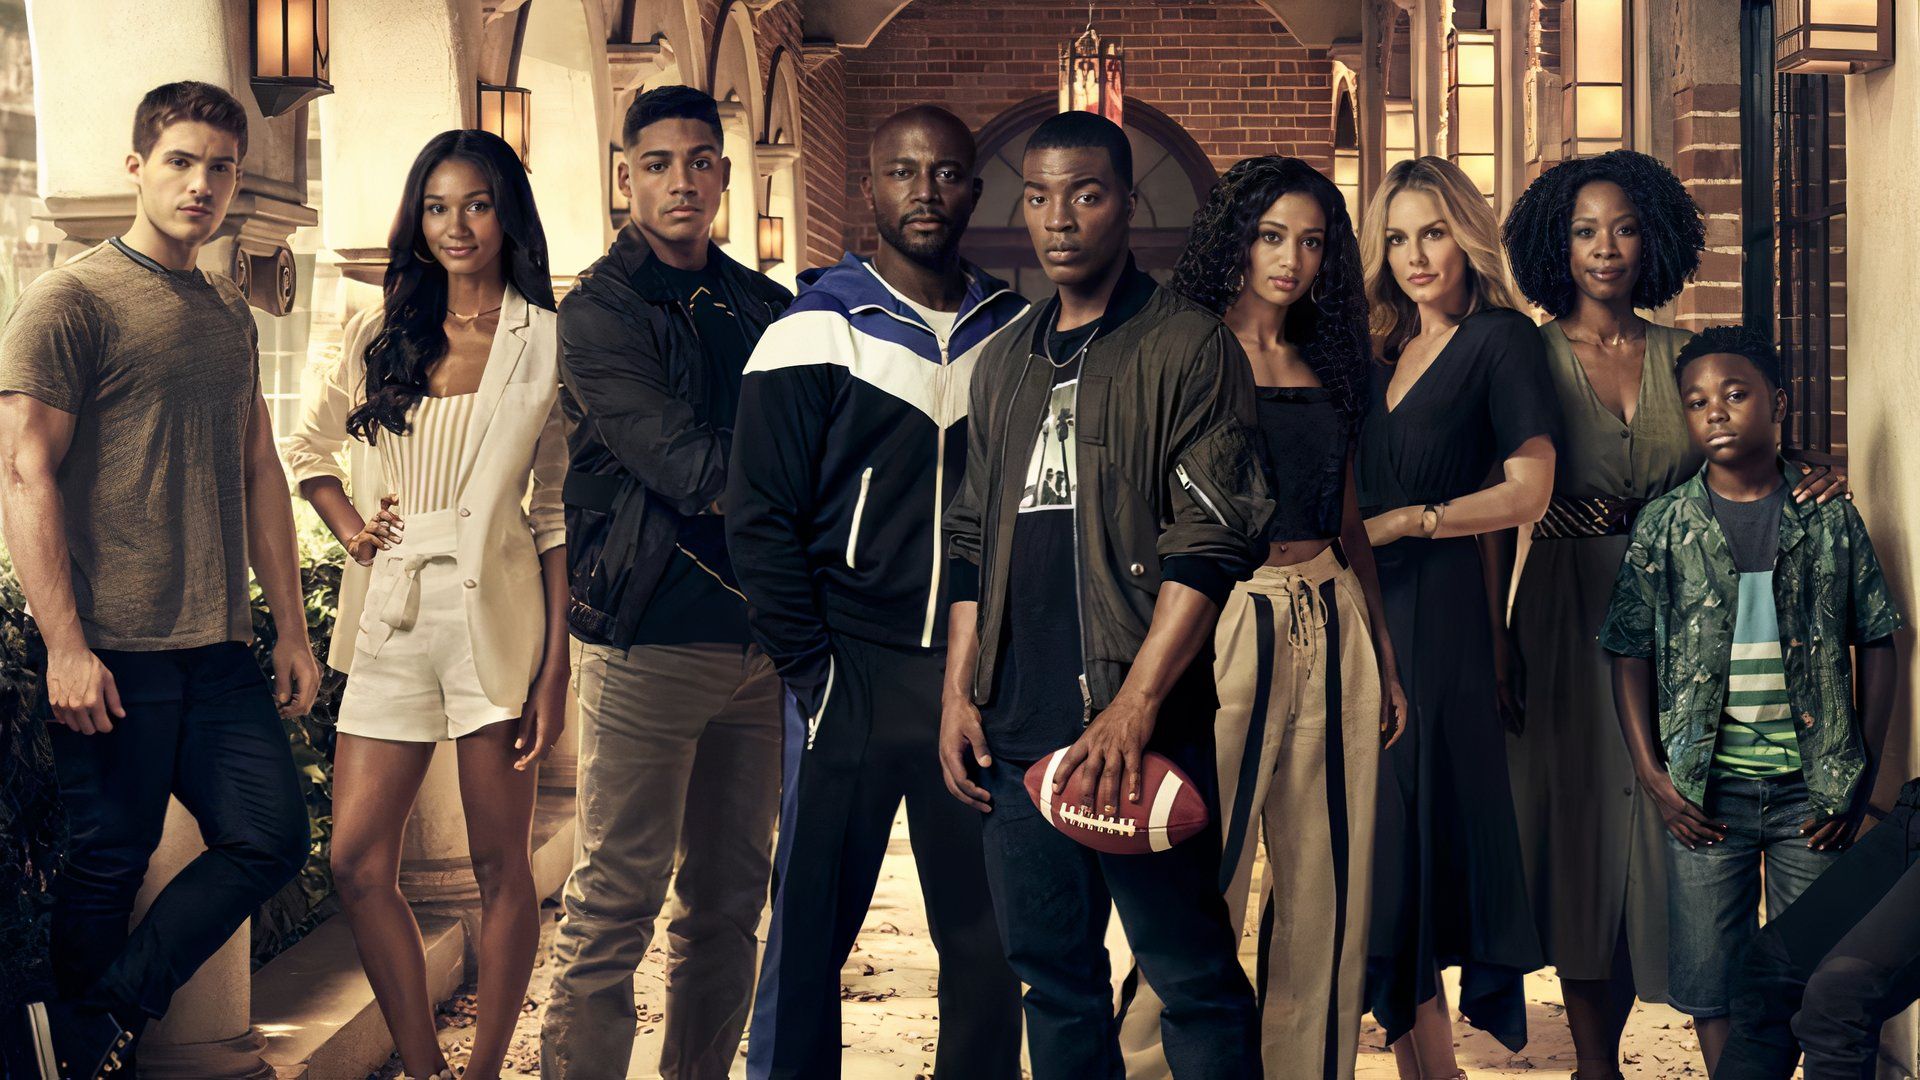 The main cast of All American including Daniel Ezra as Spencer James with Taye Diggs as Billy and Bre-Z as Tamia